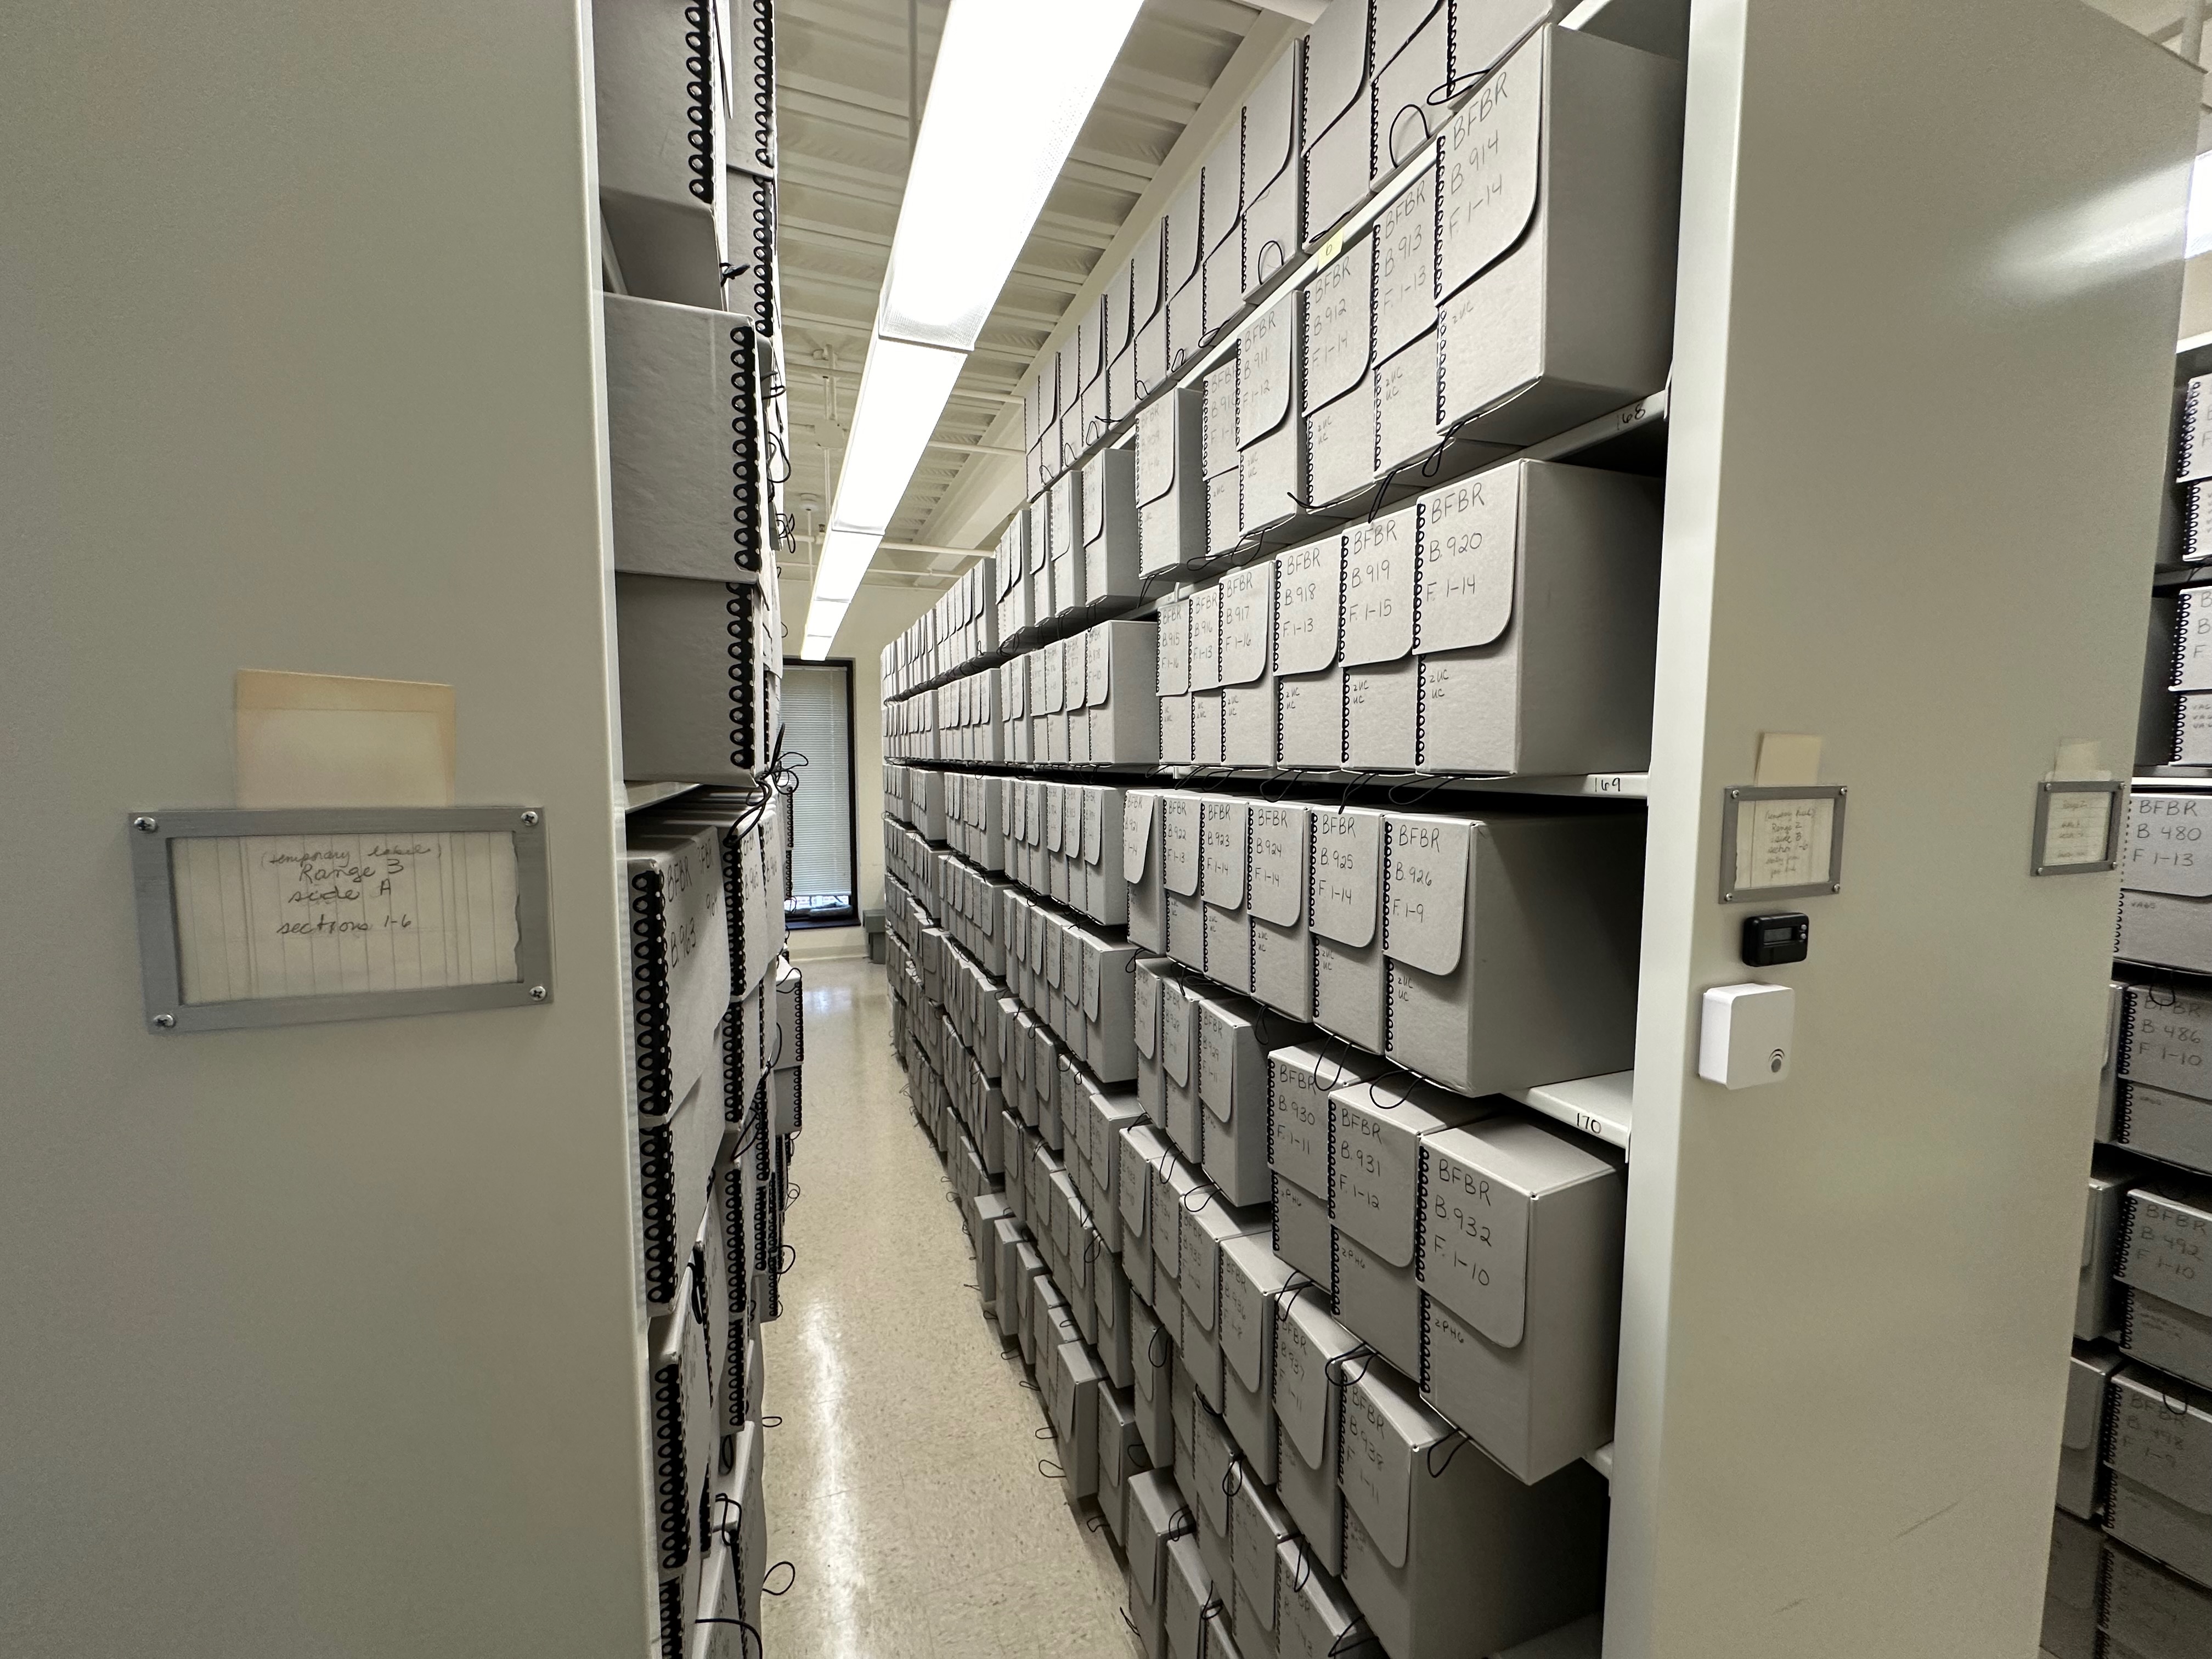 Shelves of gray archival boxes